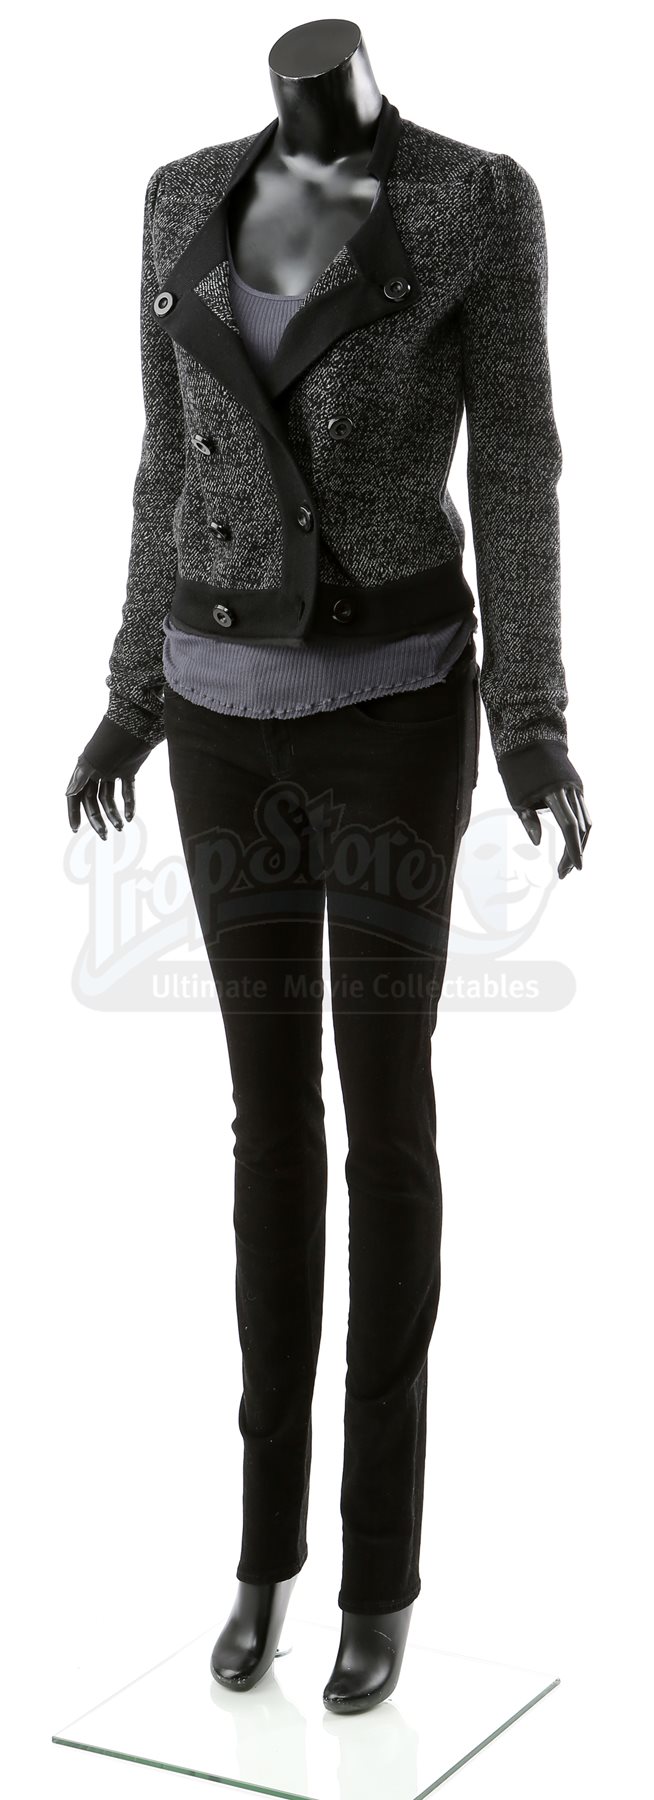 Rosalie Hale’s Strategy Costume - Current price: $425